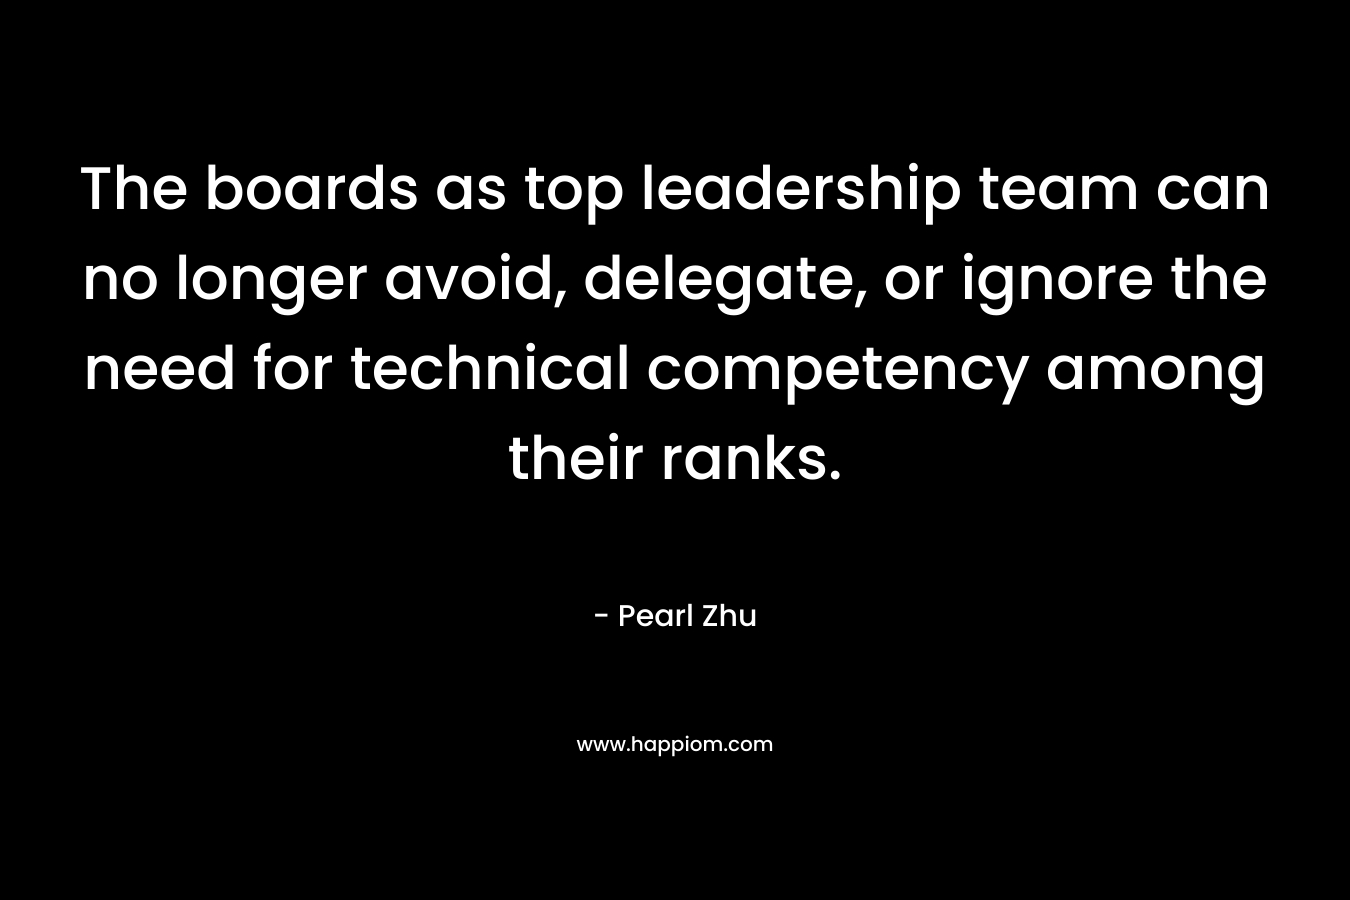 The boards as top leadership team can no longer avoid, delegate, or ignore the need for technical competency among their ranks. – Pearl Zhu